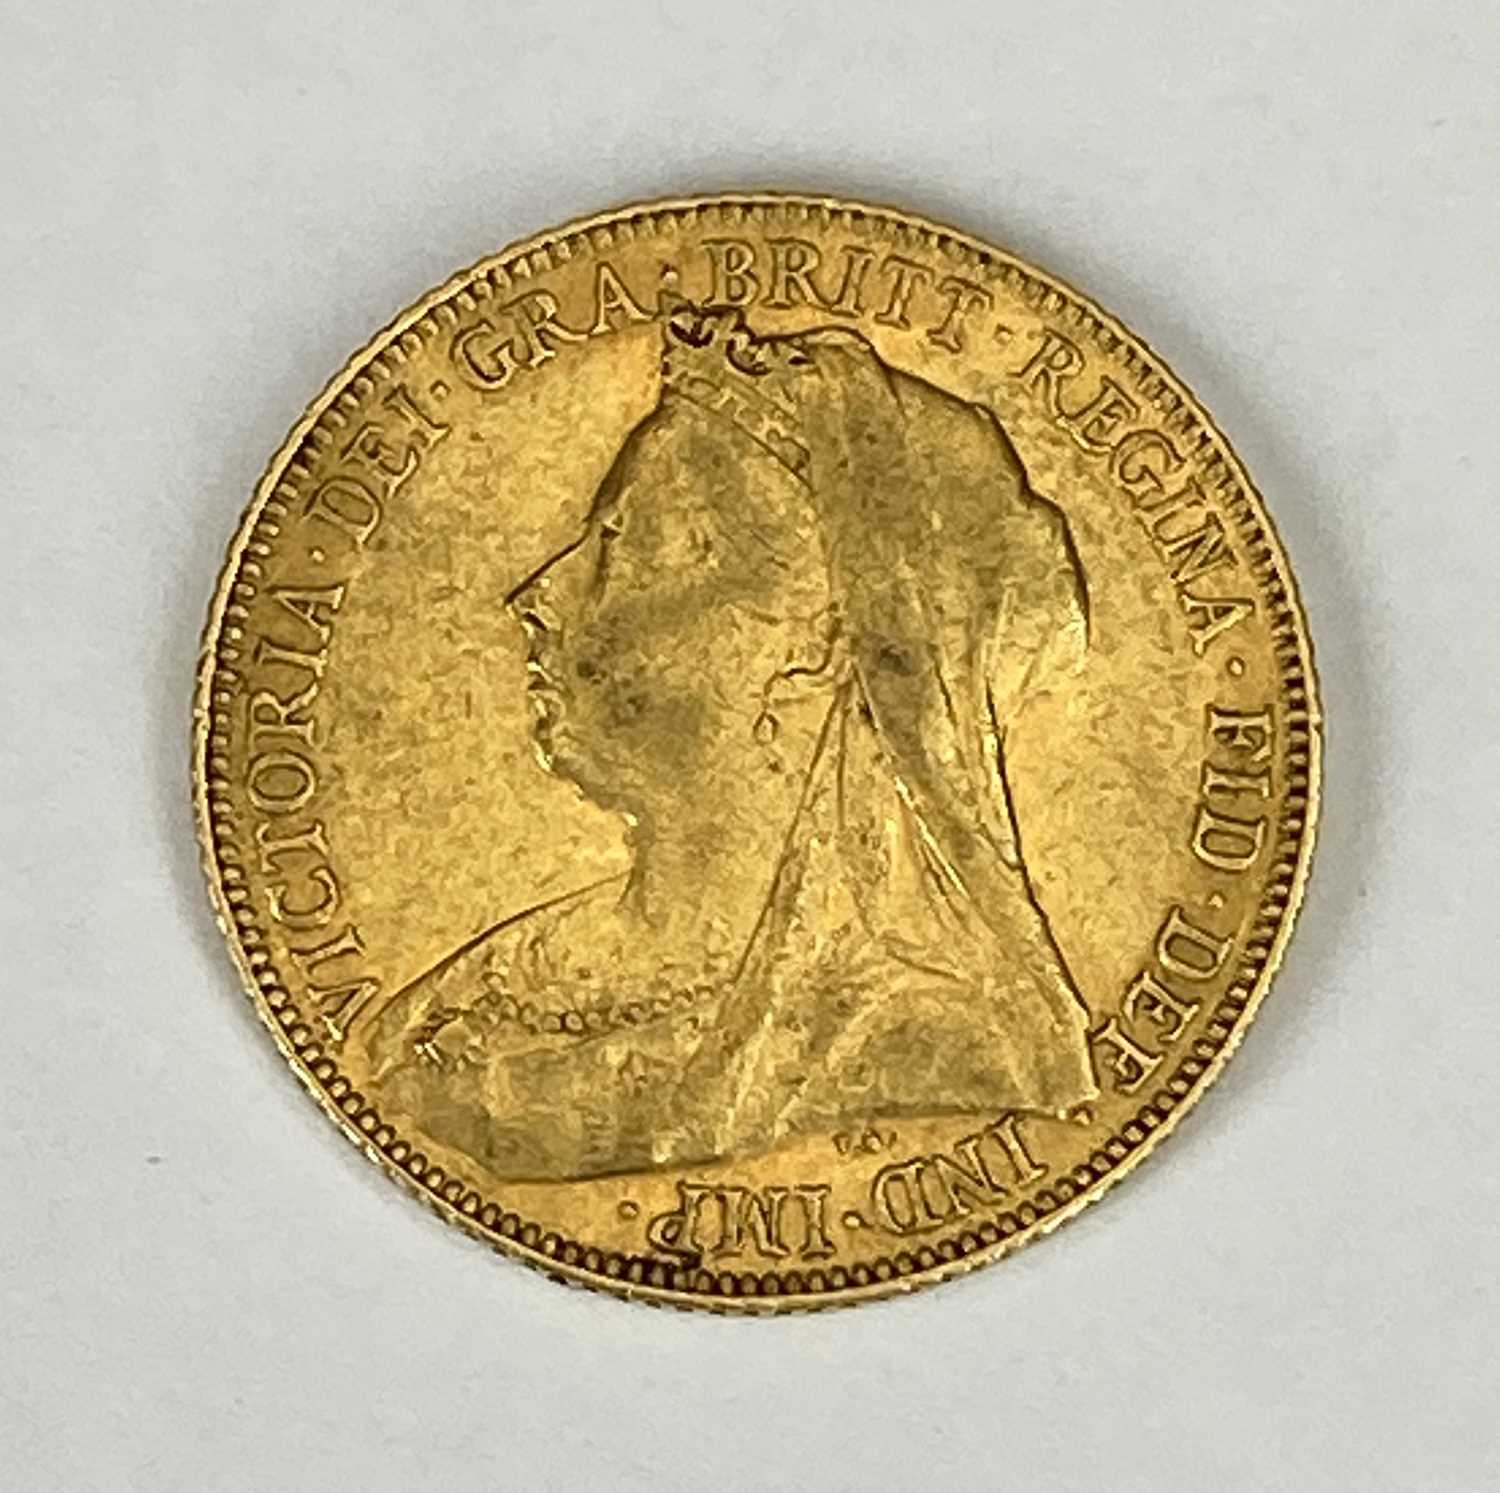 QUEEN VICTORIA VEILED BUST GOLD FULL SOVEREIGN, 1900, 8g Provenance: private collection Gwynedd - Image 2 of 2